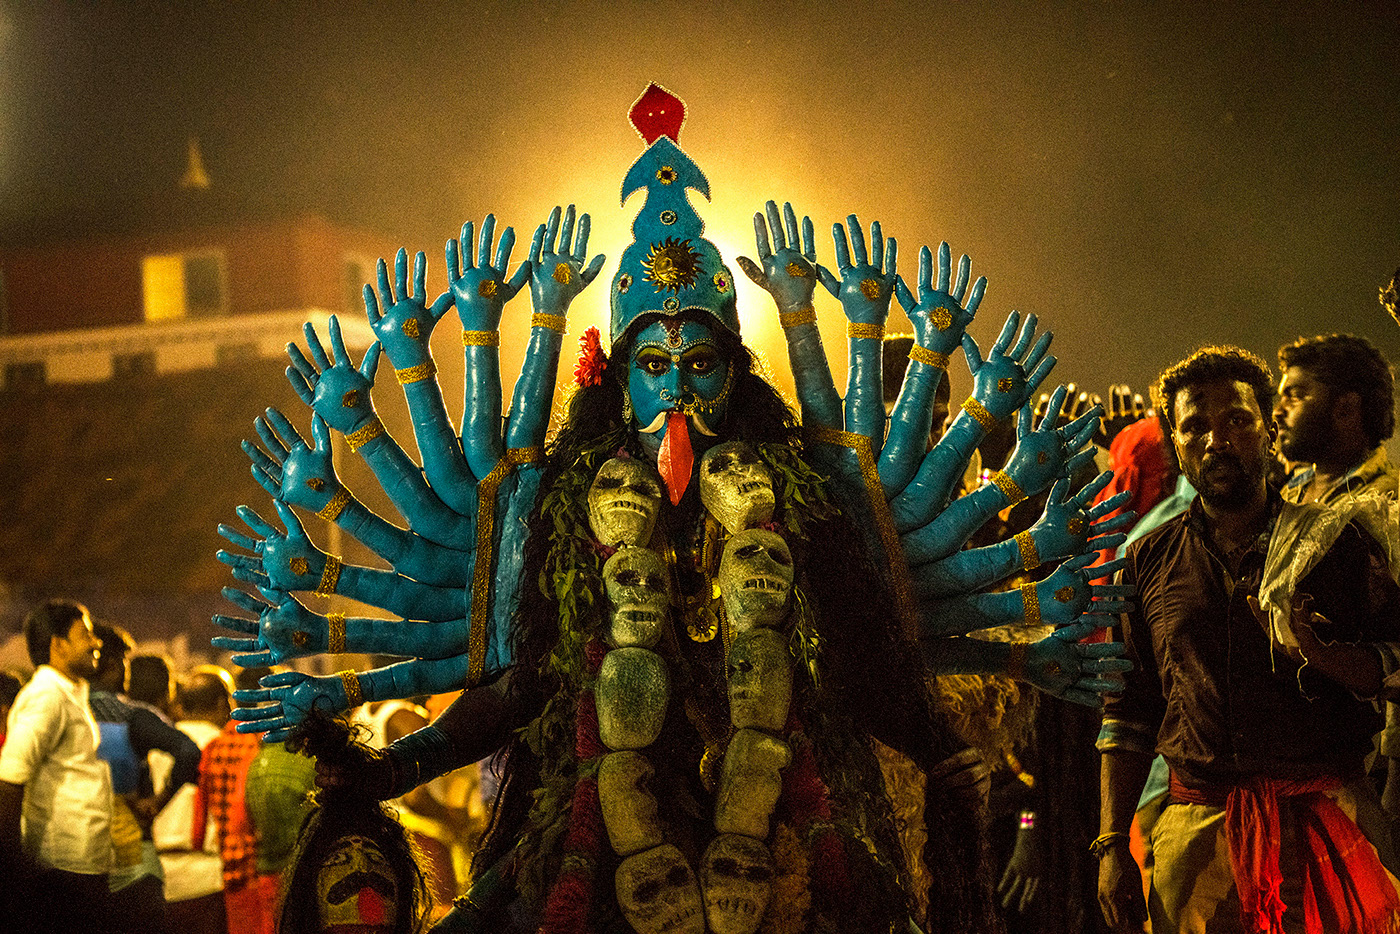 Goddess Mutharamman devotee has put make up as Goddess Kaali, with 16 hands and garland made of skull.